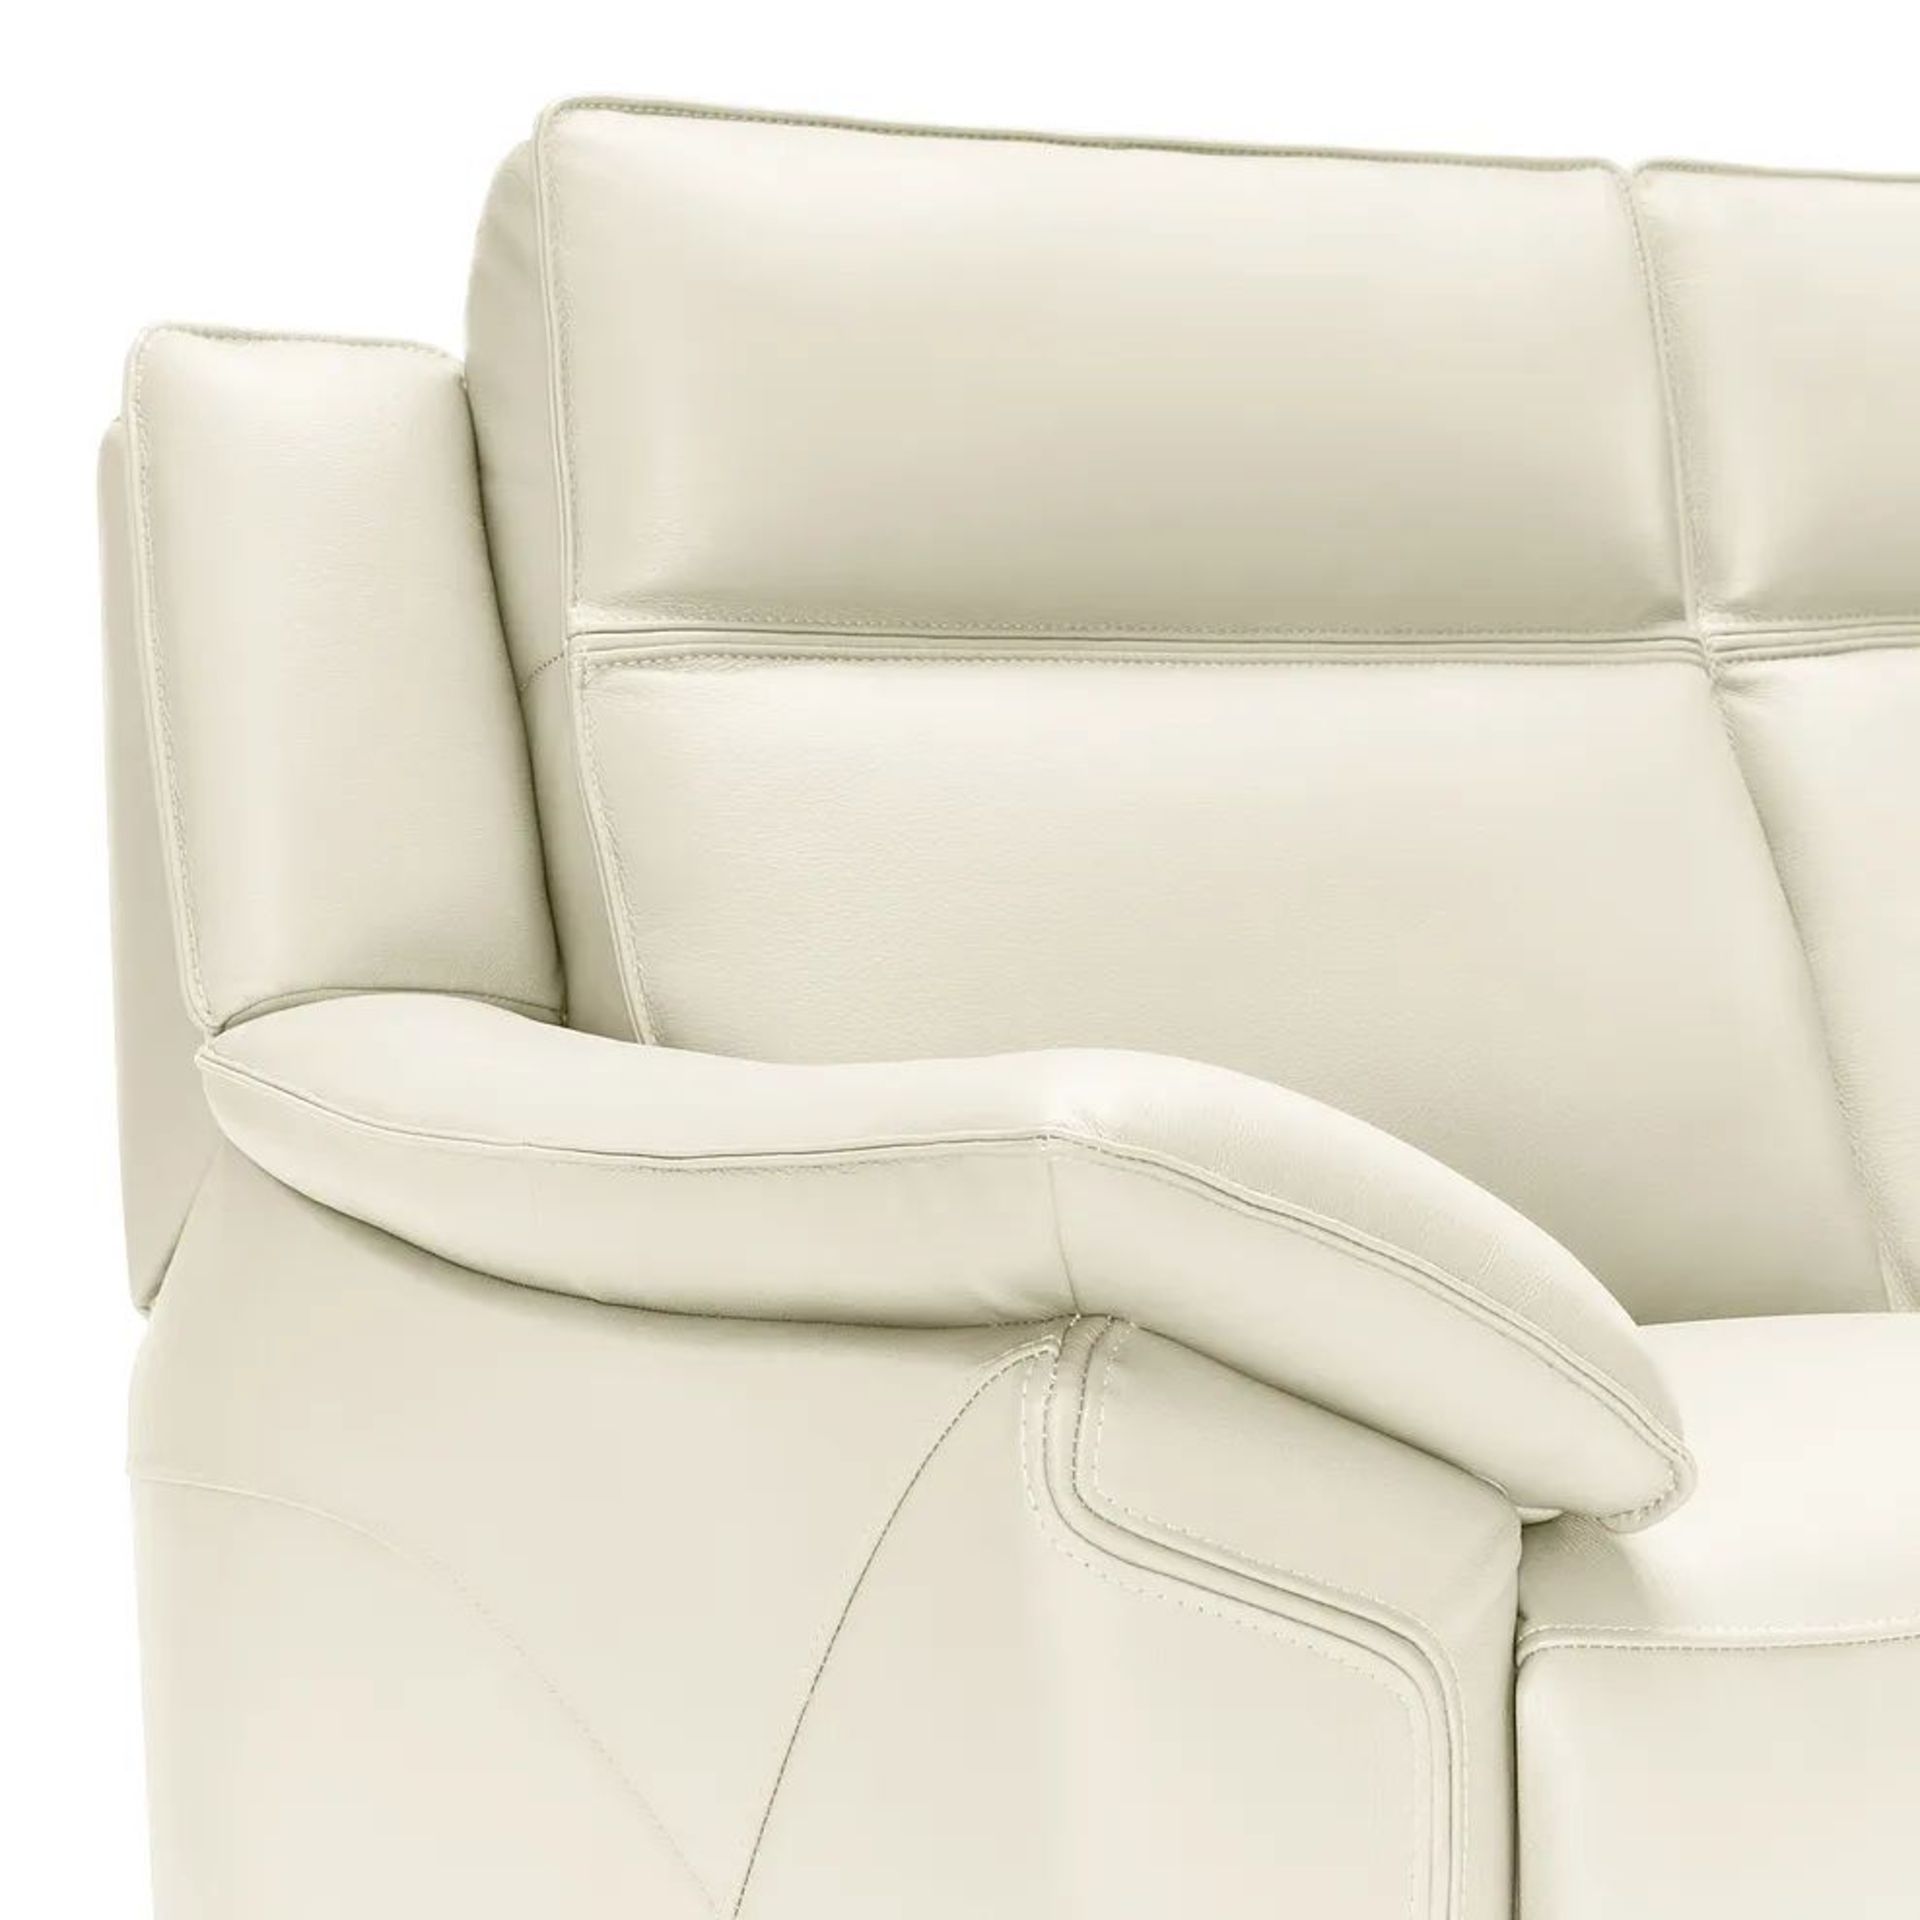 BRAND NEW DUNE 2 Seater Sofa - SNOW WHITE LEATHER. RRP £1579. Pairing comfort with classic design, - Image 7 of 8